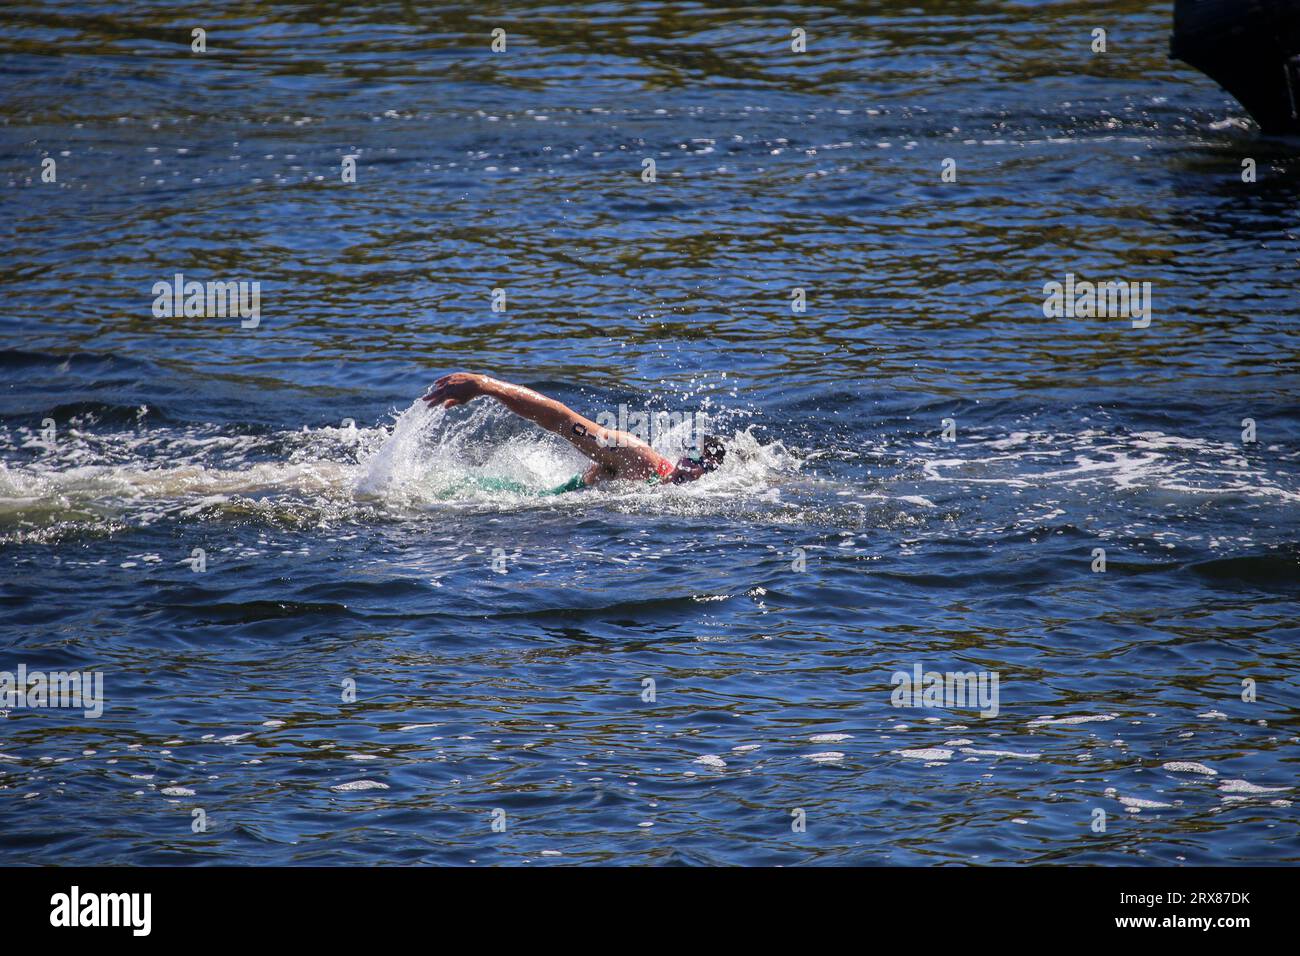 Pontevedra, Spain, September 23, 2023: South African triathlete Jamie Riddle in the swimming event during the 2023 Men's U23 Triathlon World Championships, on September 23, 2023, in Pontevedra, Spain. Credit: Alberto Brevers / Alamy Live News. Stock Photo